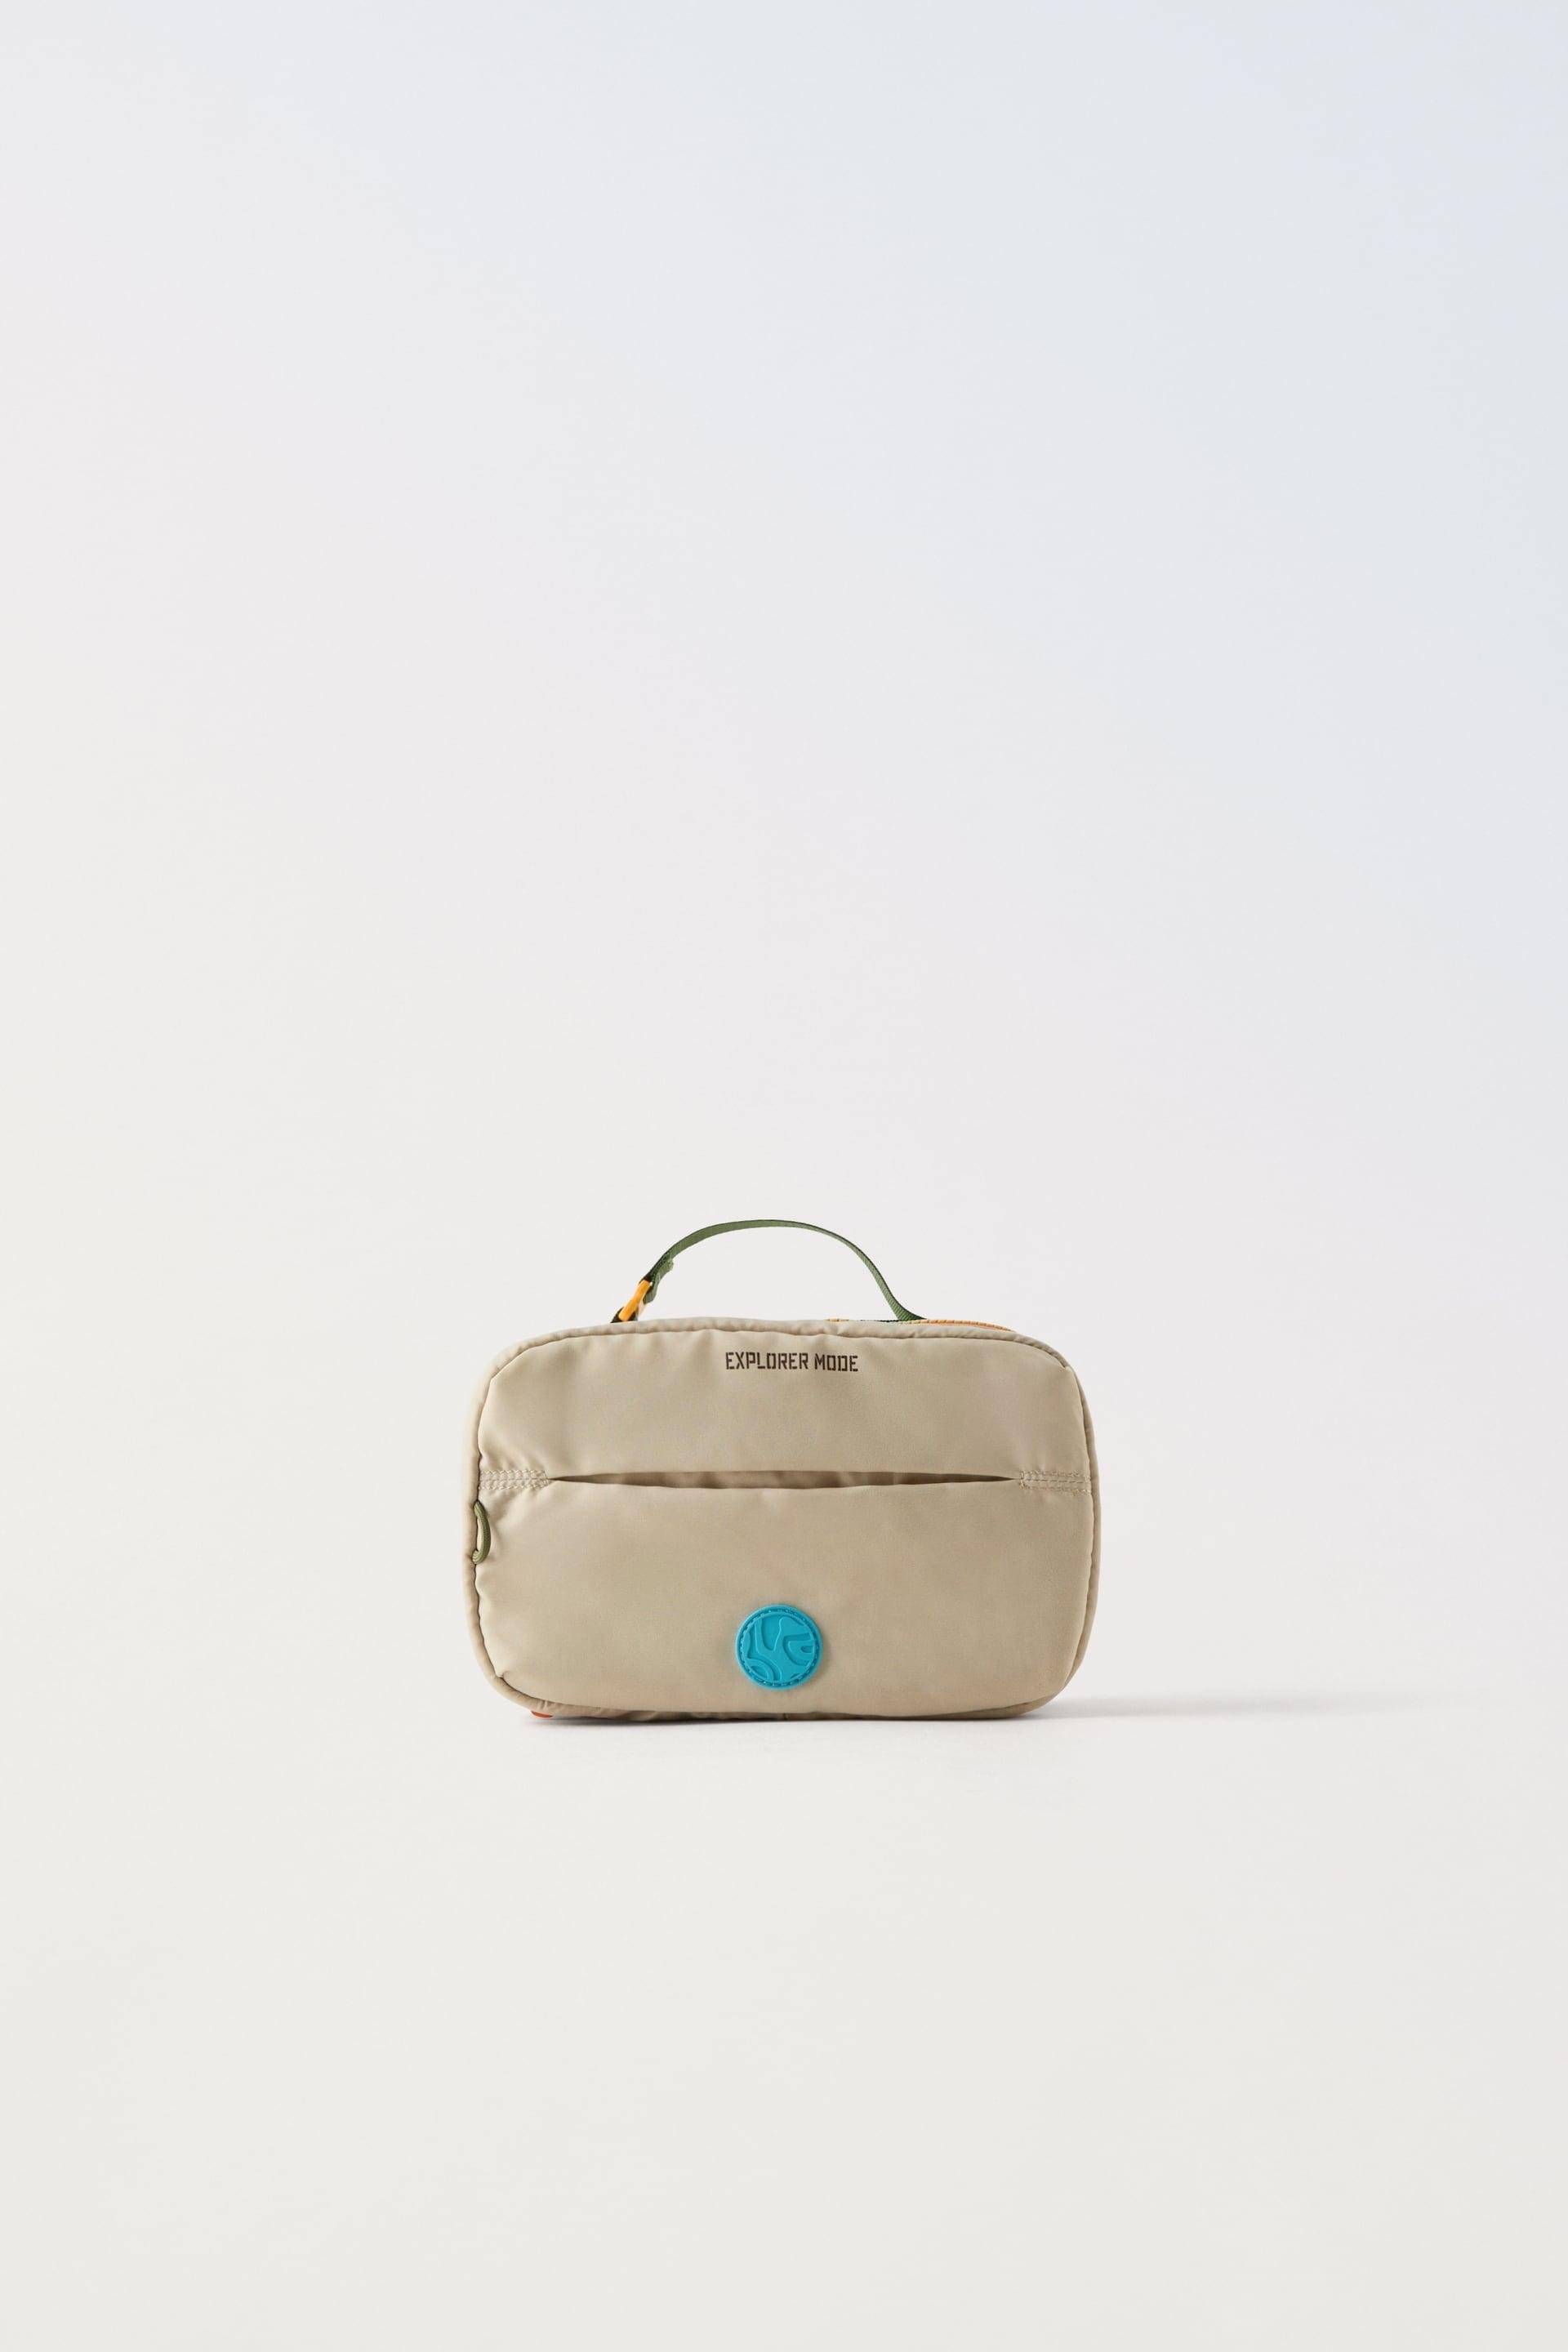 CAMPING POUCH by ZARA